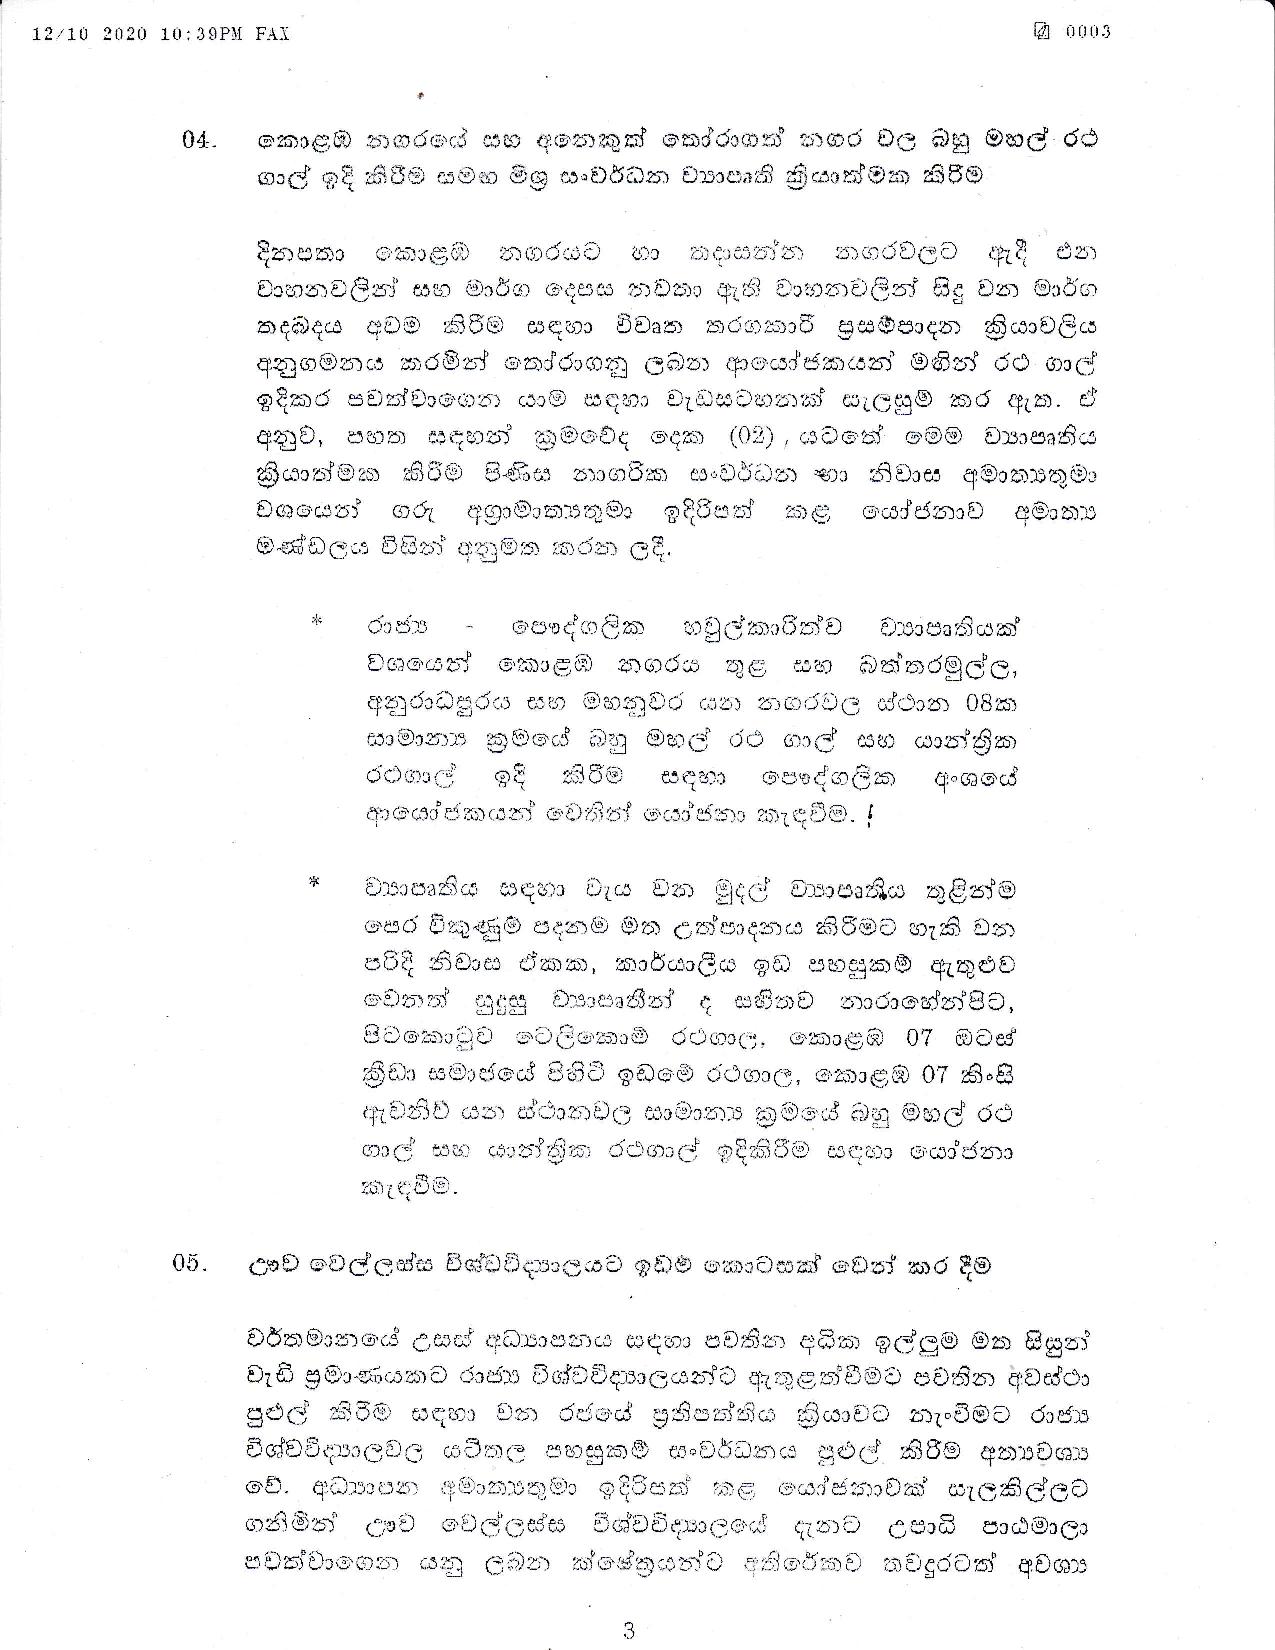 Cabinet Decision on 12.10.2020 page 003